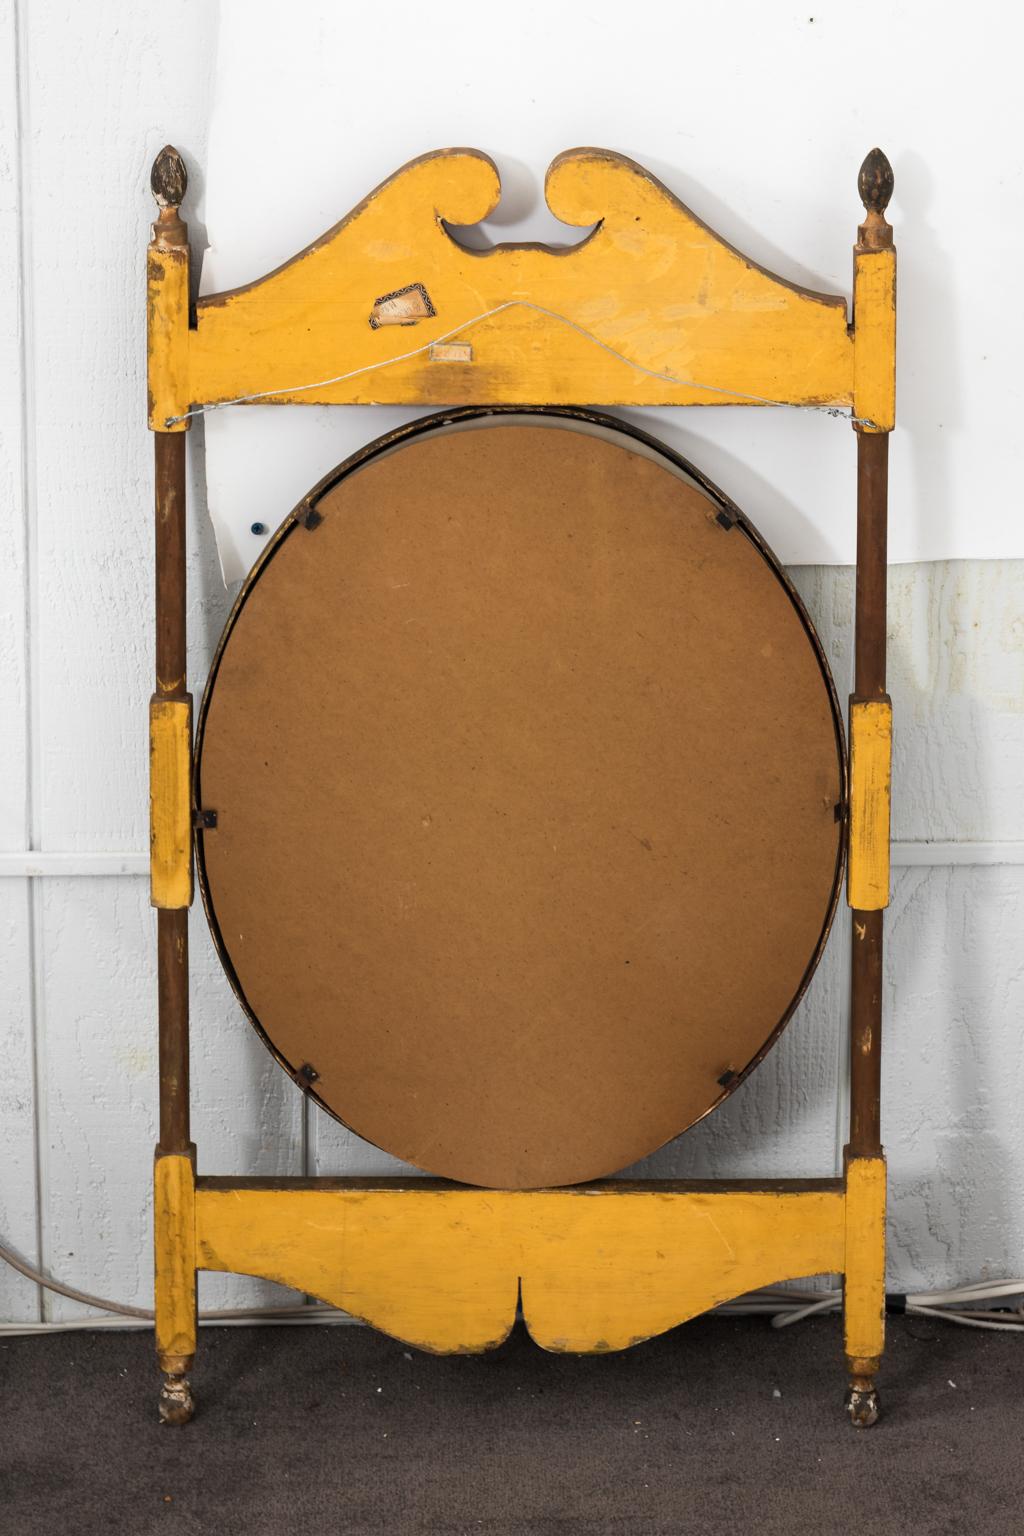 Antique hanging sign converted into a gilded neoclassical mirror with carved broken scroll crown and finials. From the United States. Please note that this mirror has original patina, the gilding has minor chips and wear with age, circa 1870s.